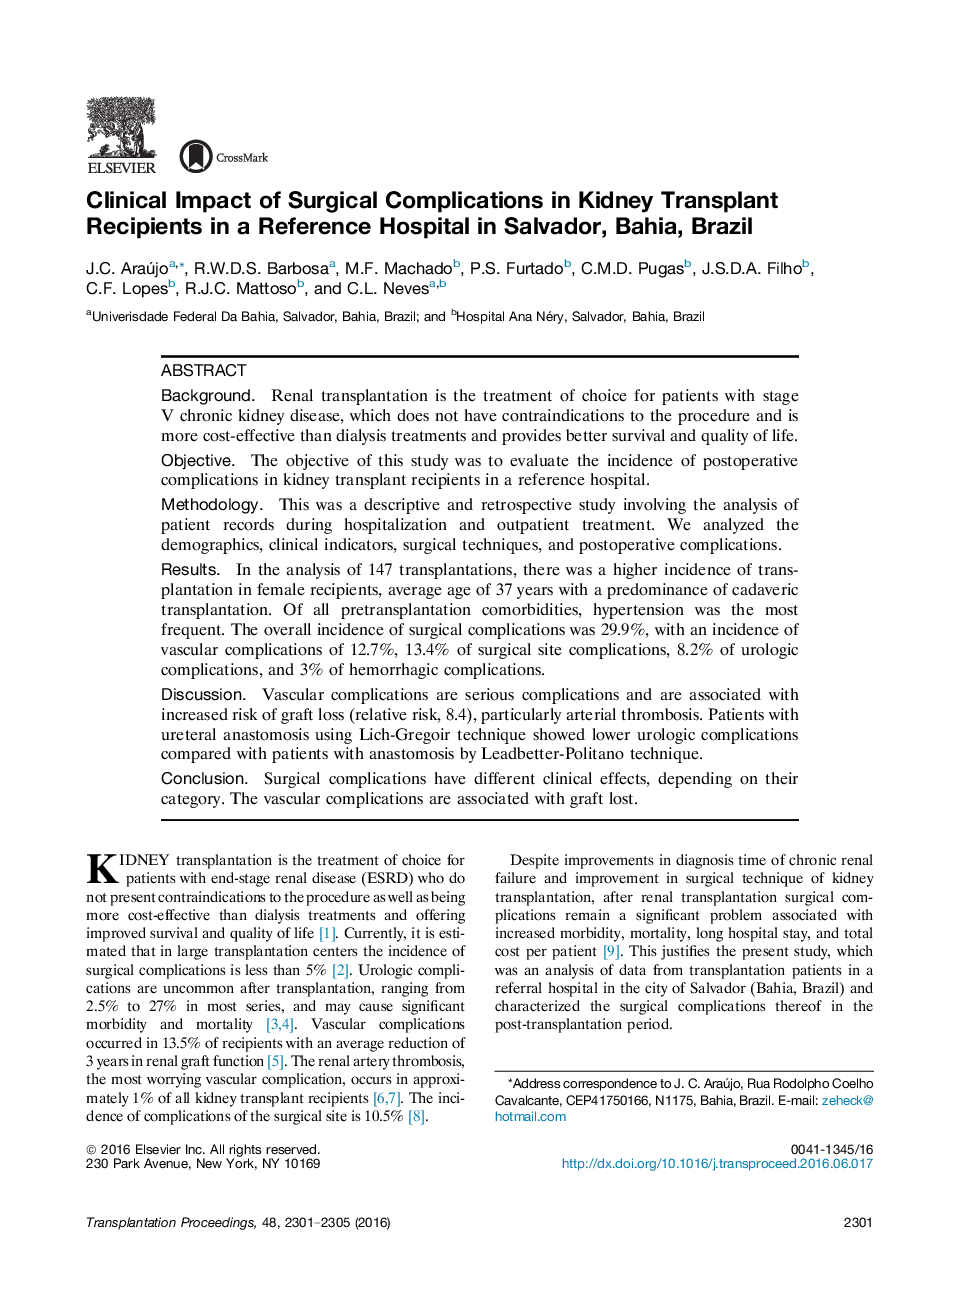 14th Congress of the Brazilian Transplantation Society and the 14th Congress of the Luso-Brazilian Transplantation SocietyKidney transplantationClinical Impact of Surgical Complications in Kidney Transplant Recipients in a Reference Hospital in Salvador, 